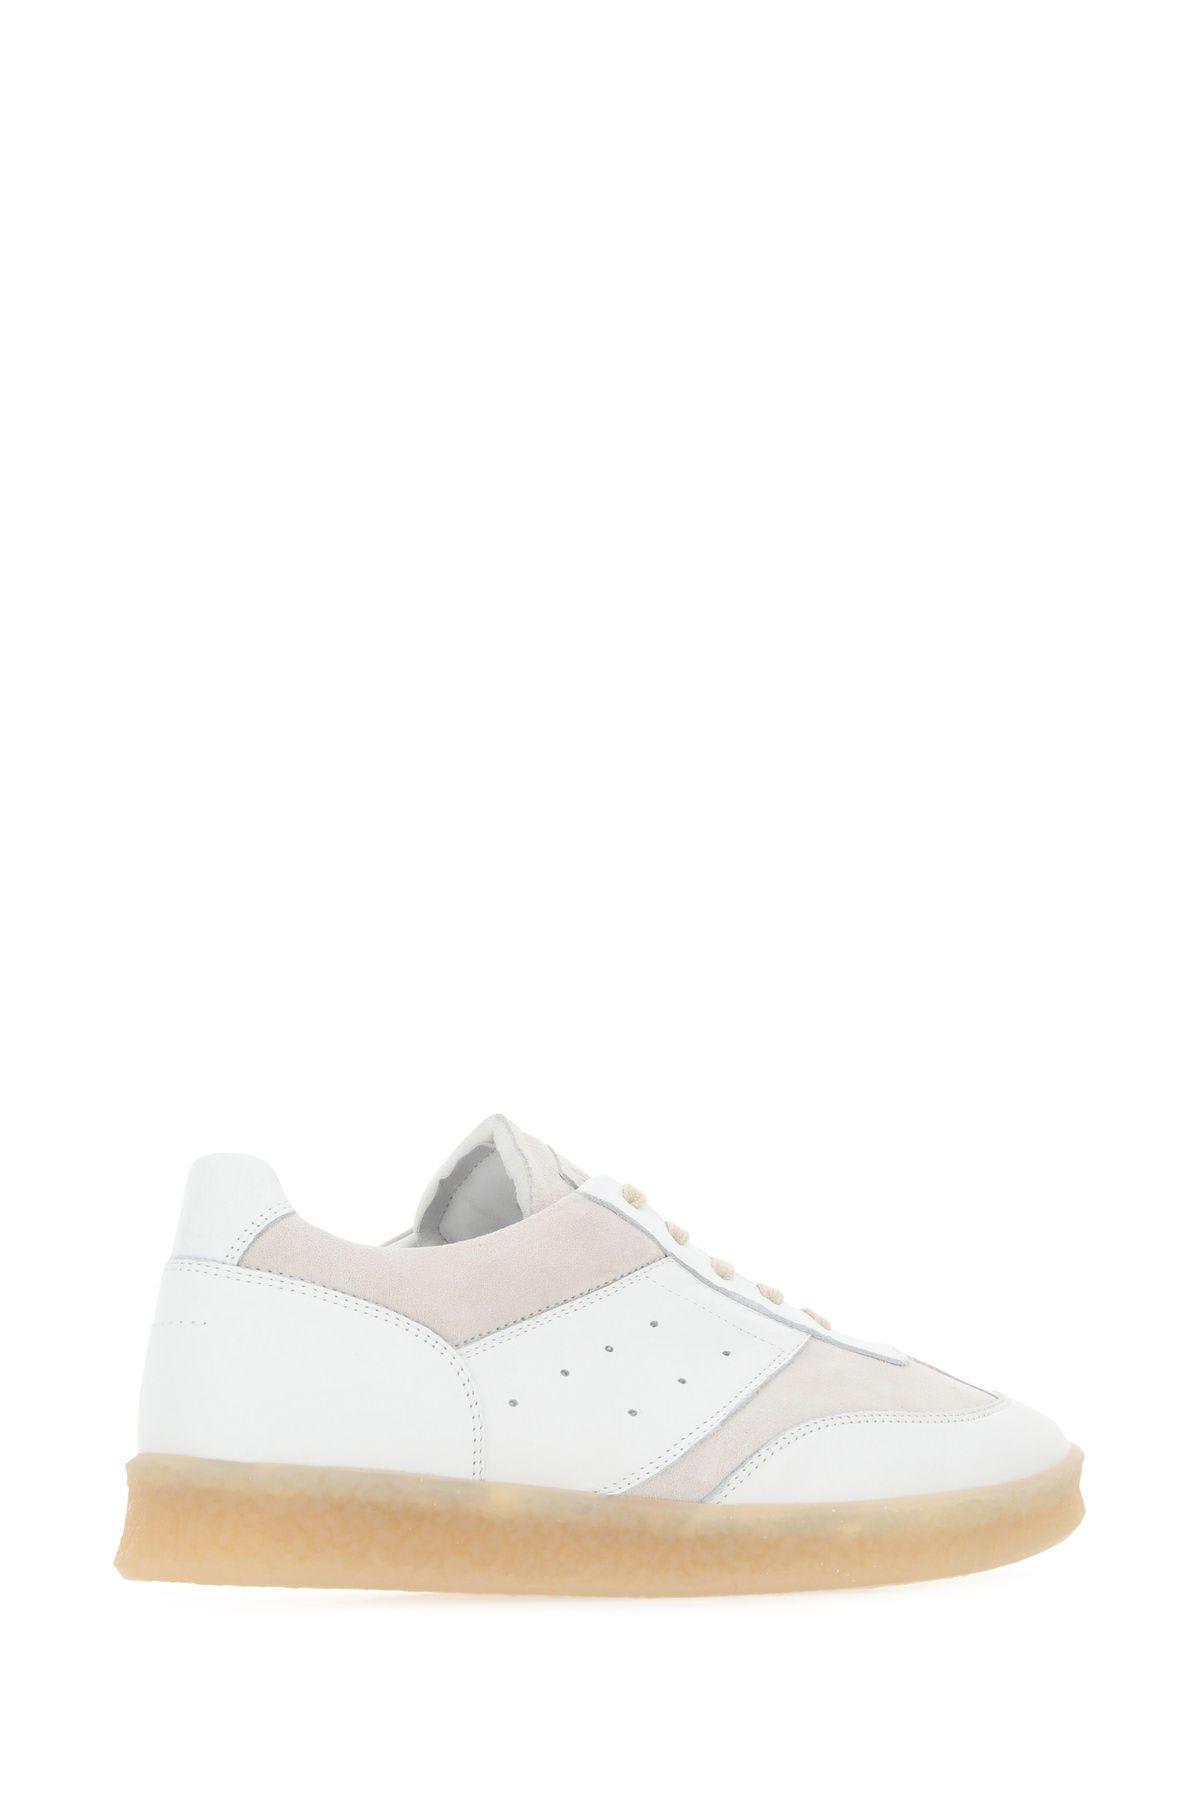 Shop Mm6 Maison Margiela Two-tone Leather And Suede Sneakers In White/silver Birch